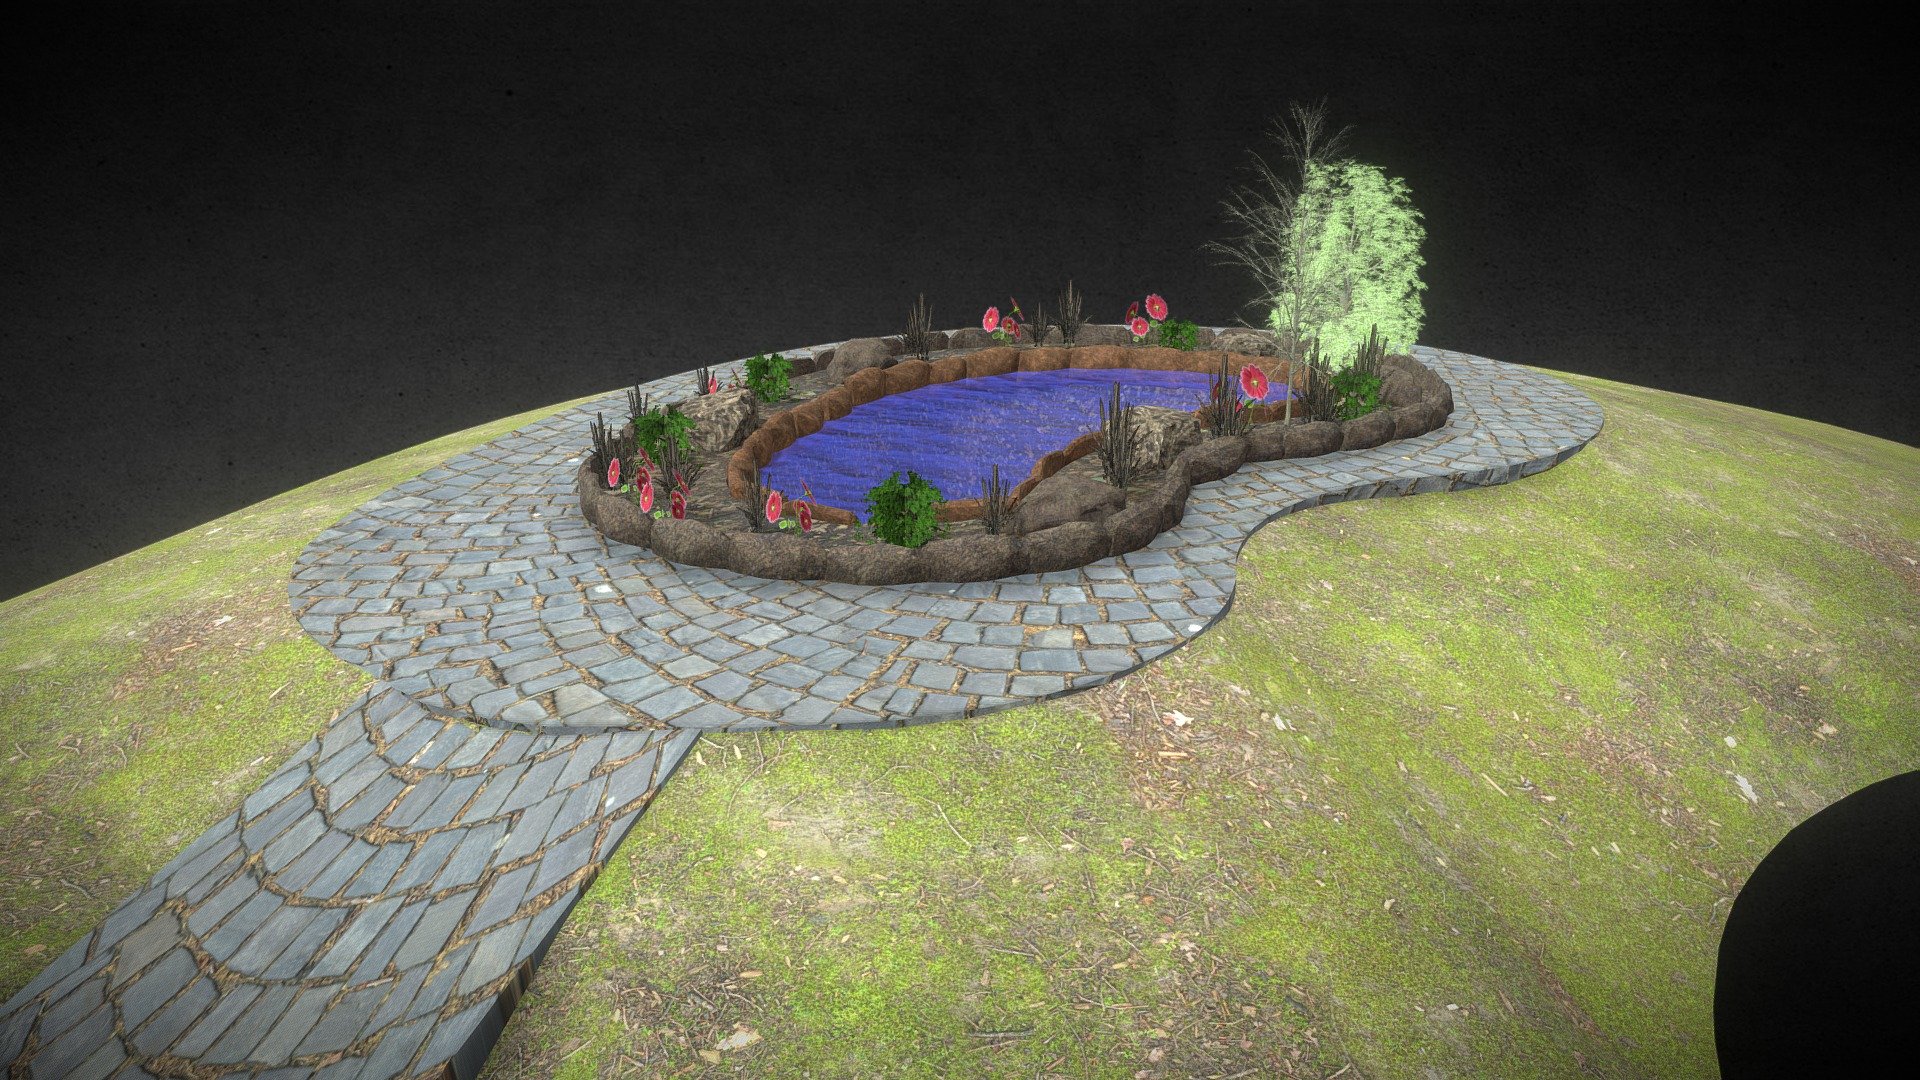 Game Ready Garden Pond / Dam
Mesh parts -Pond, Hill Trees, Bushes
Each with UVs for Static light build in UE4

Import into UE4 and untick &ldquo;Combine Meshes